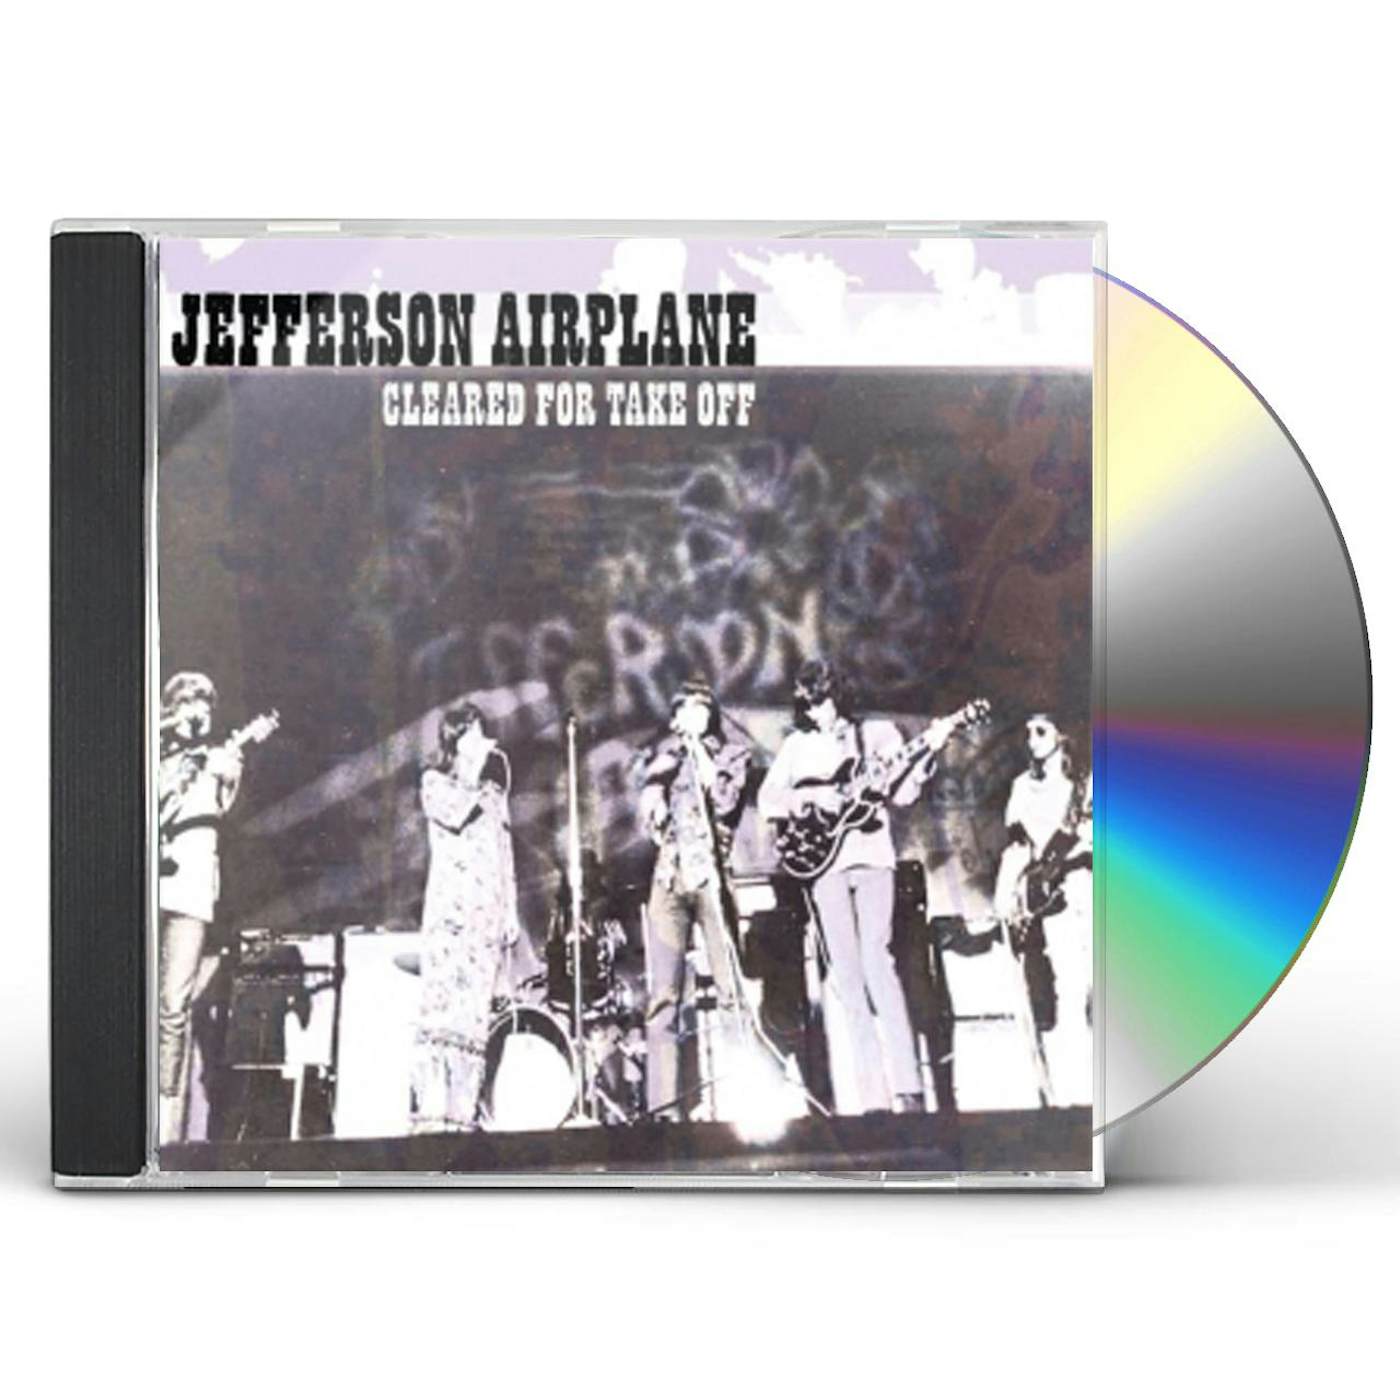 Jefferson Airplane CLEARED FOR TAKE OFF CD